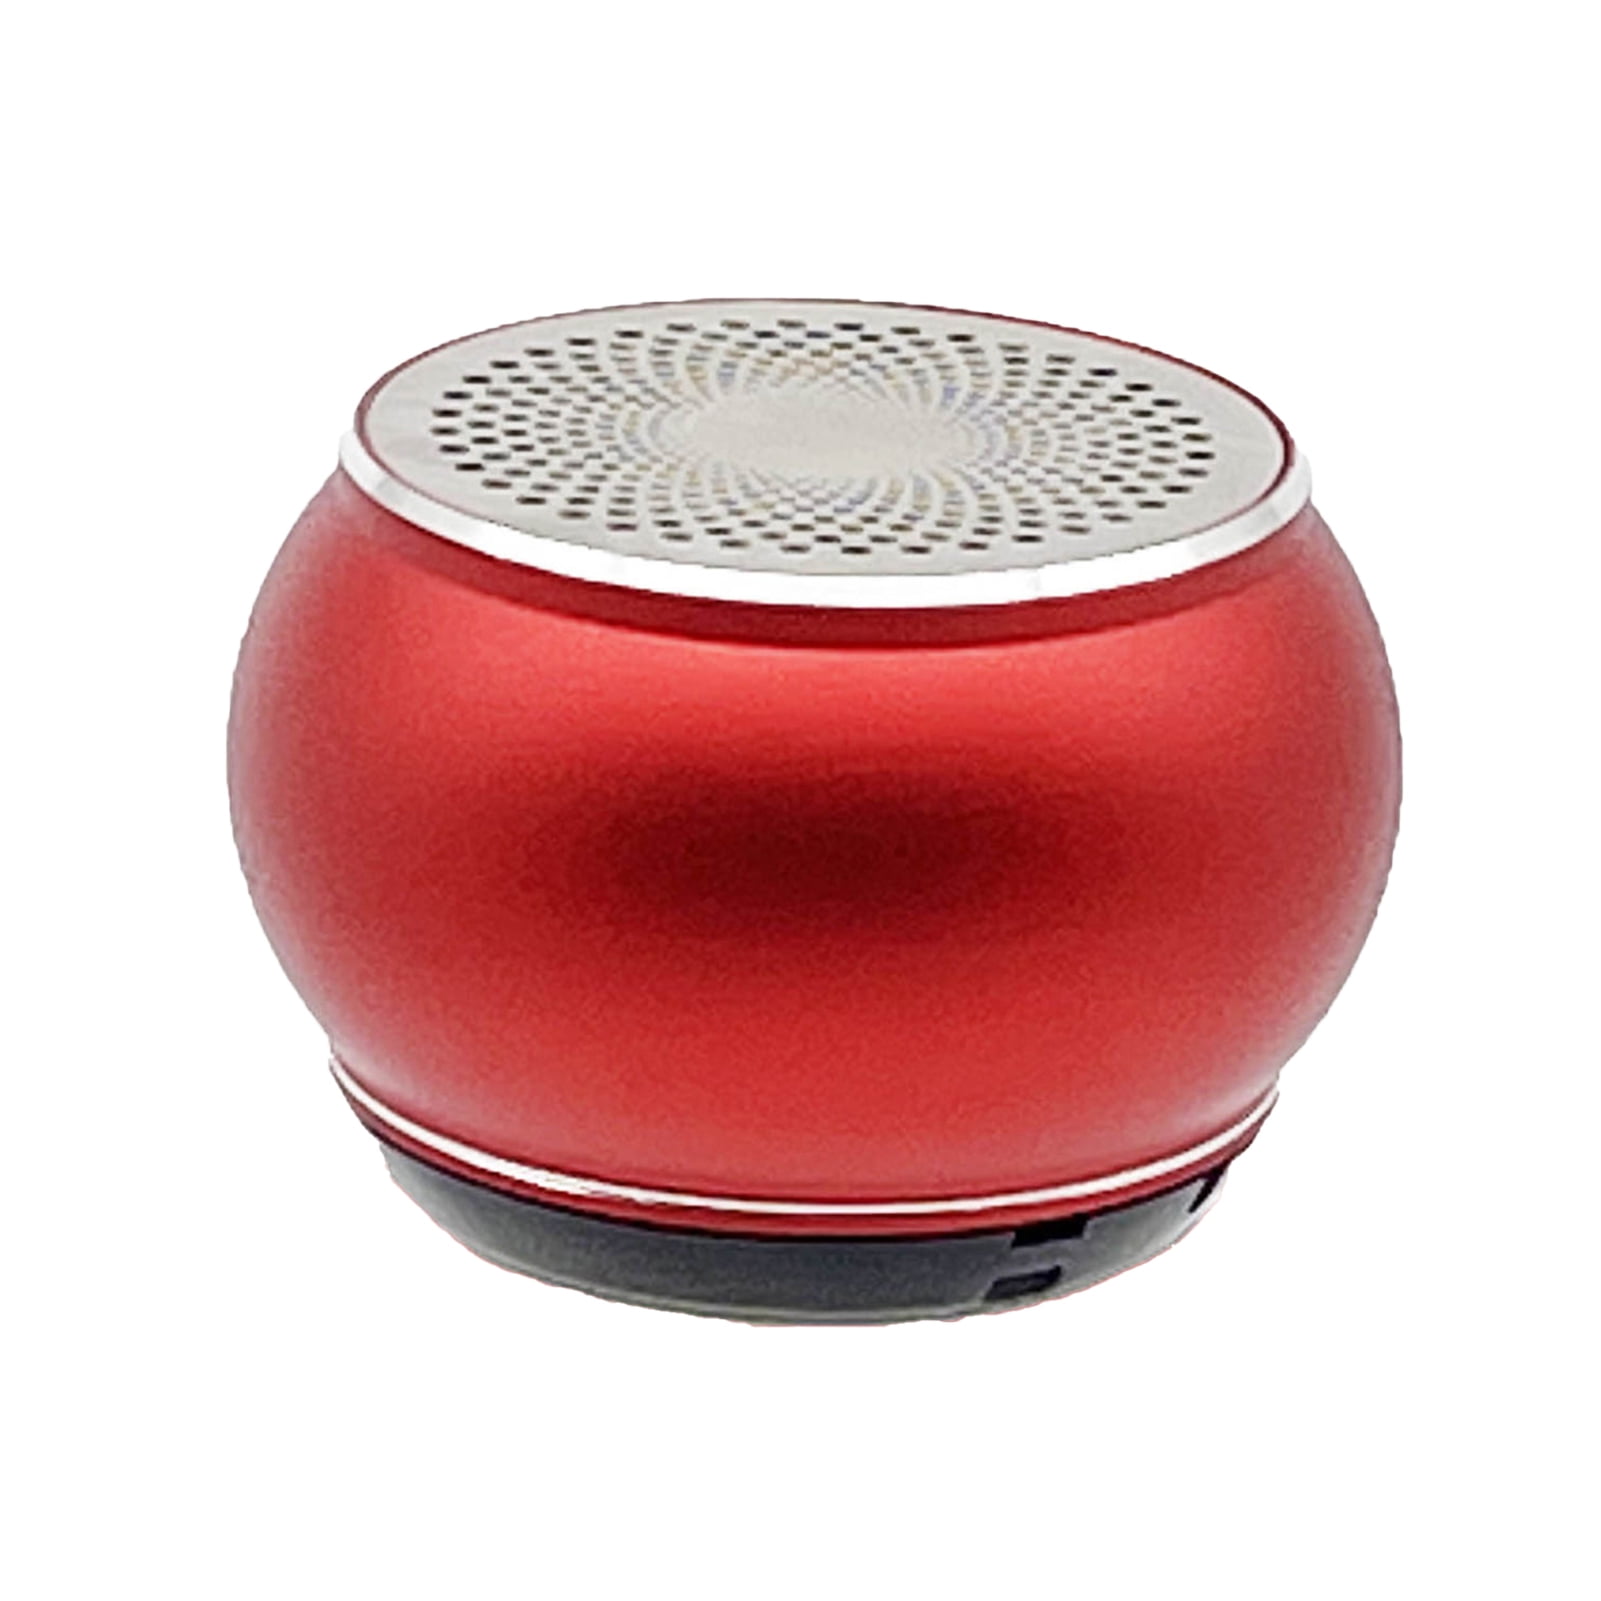 Bluetooth-compatible5.0 Loudspeaker Speaker Car Wireless Hands-free Boc Support Stereo Mini HiFi Portable Calling for Interconnection